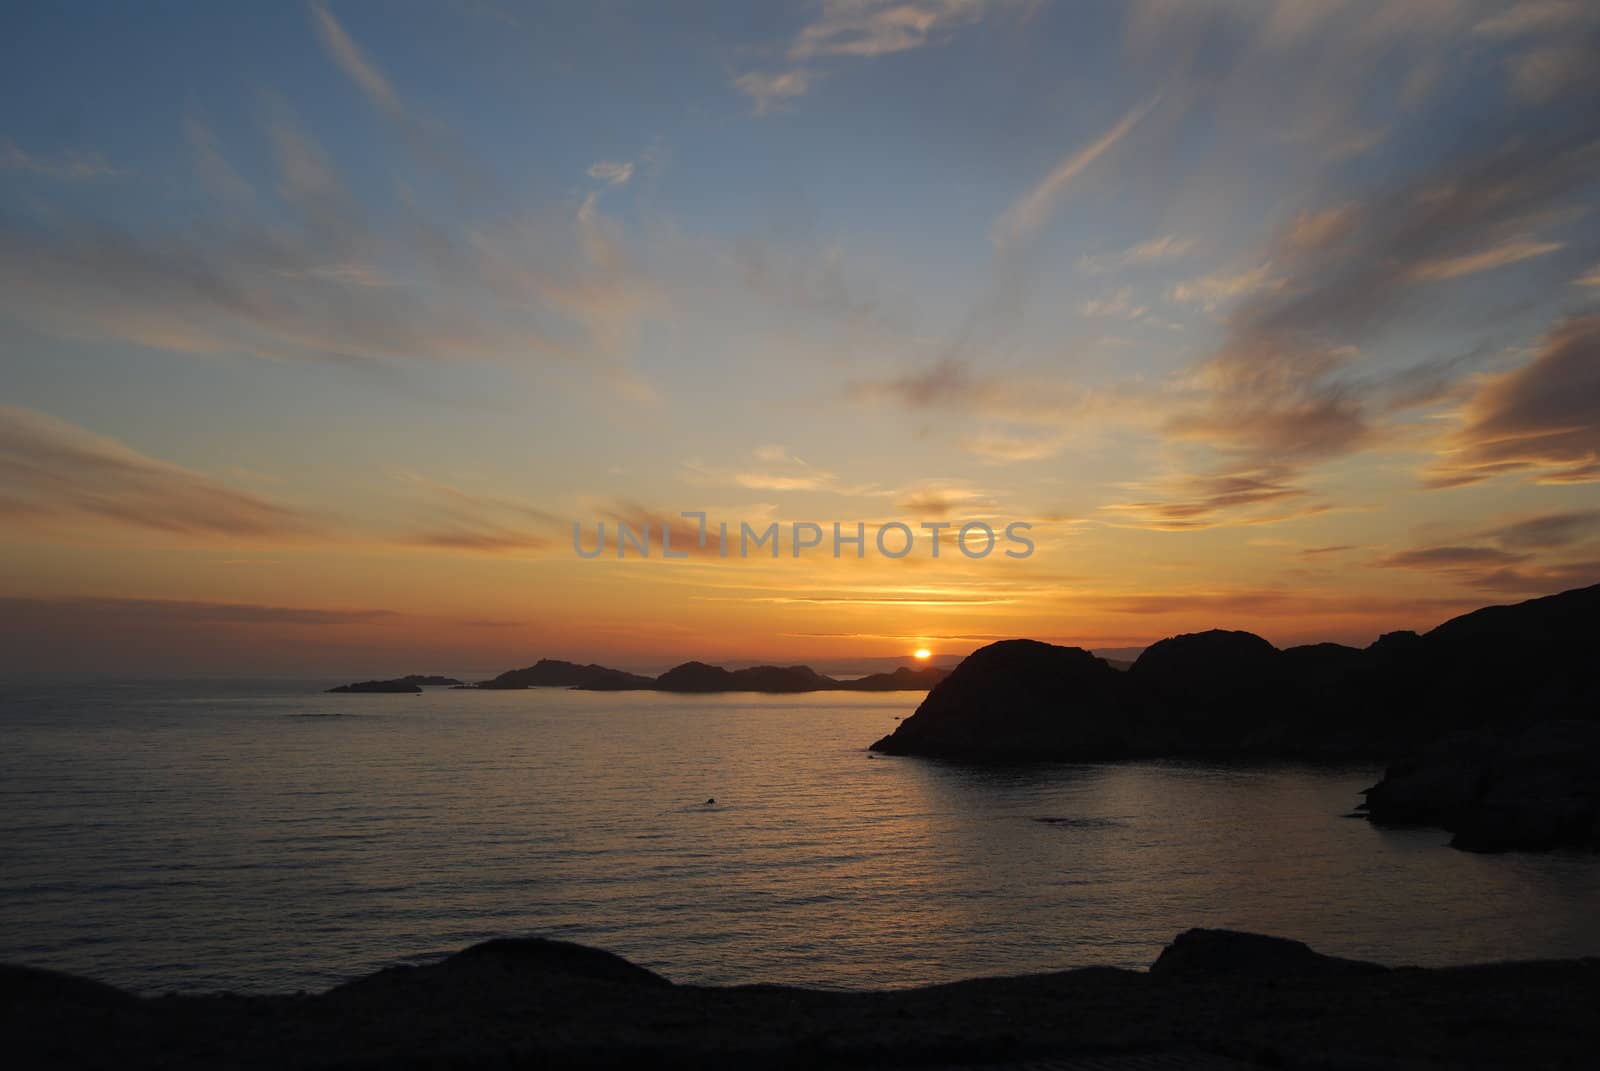 Sunset on the southern tip of Norway, Lindesnes Fyr.